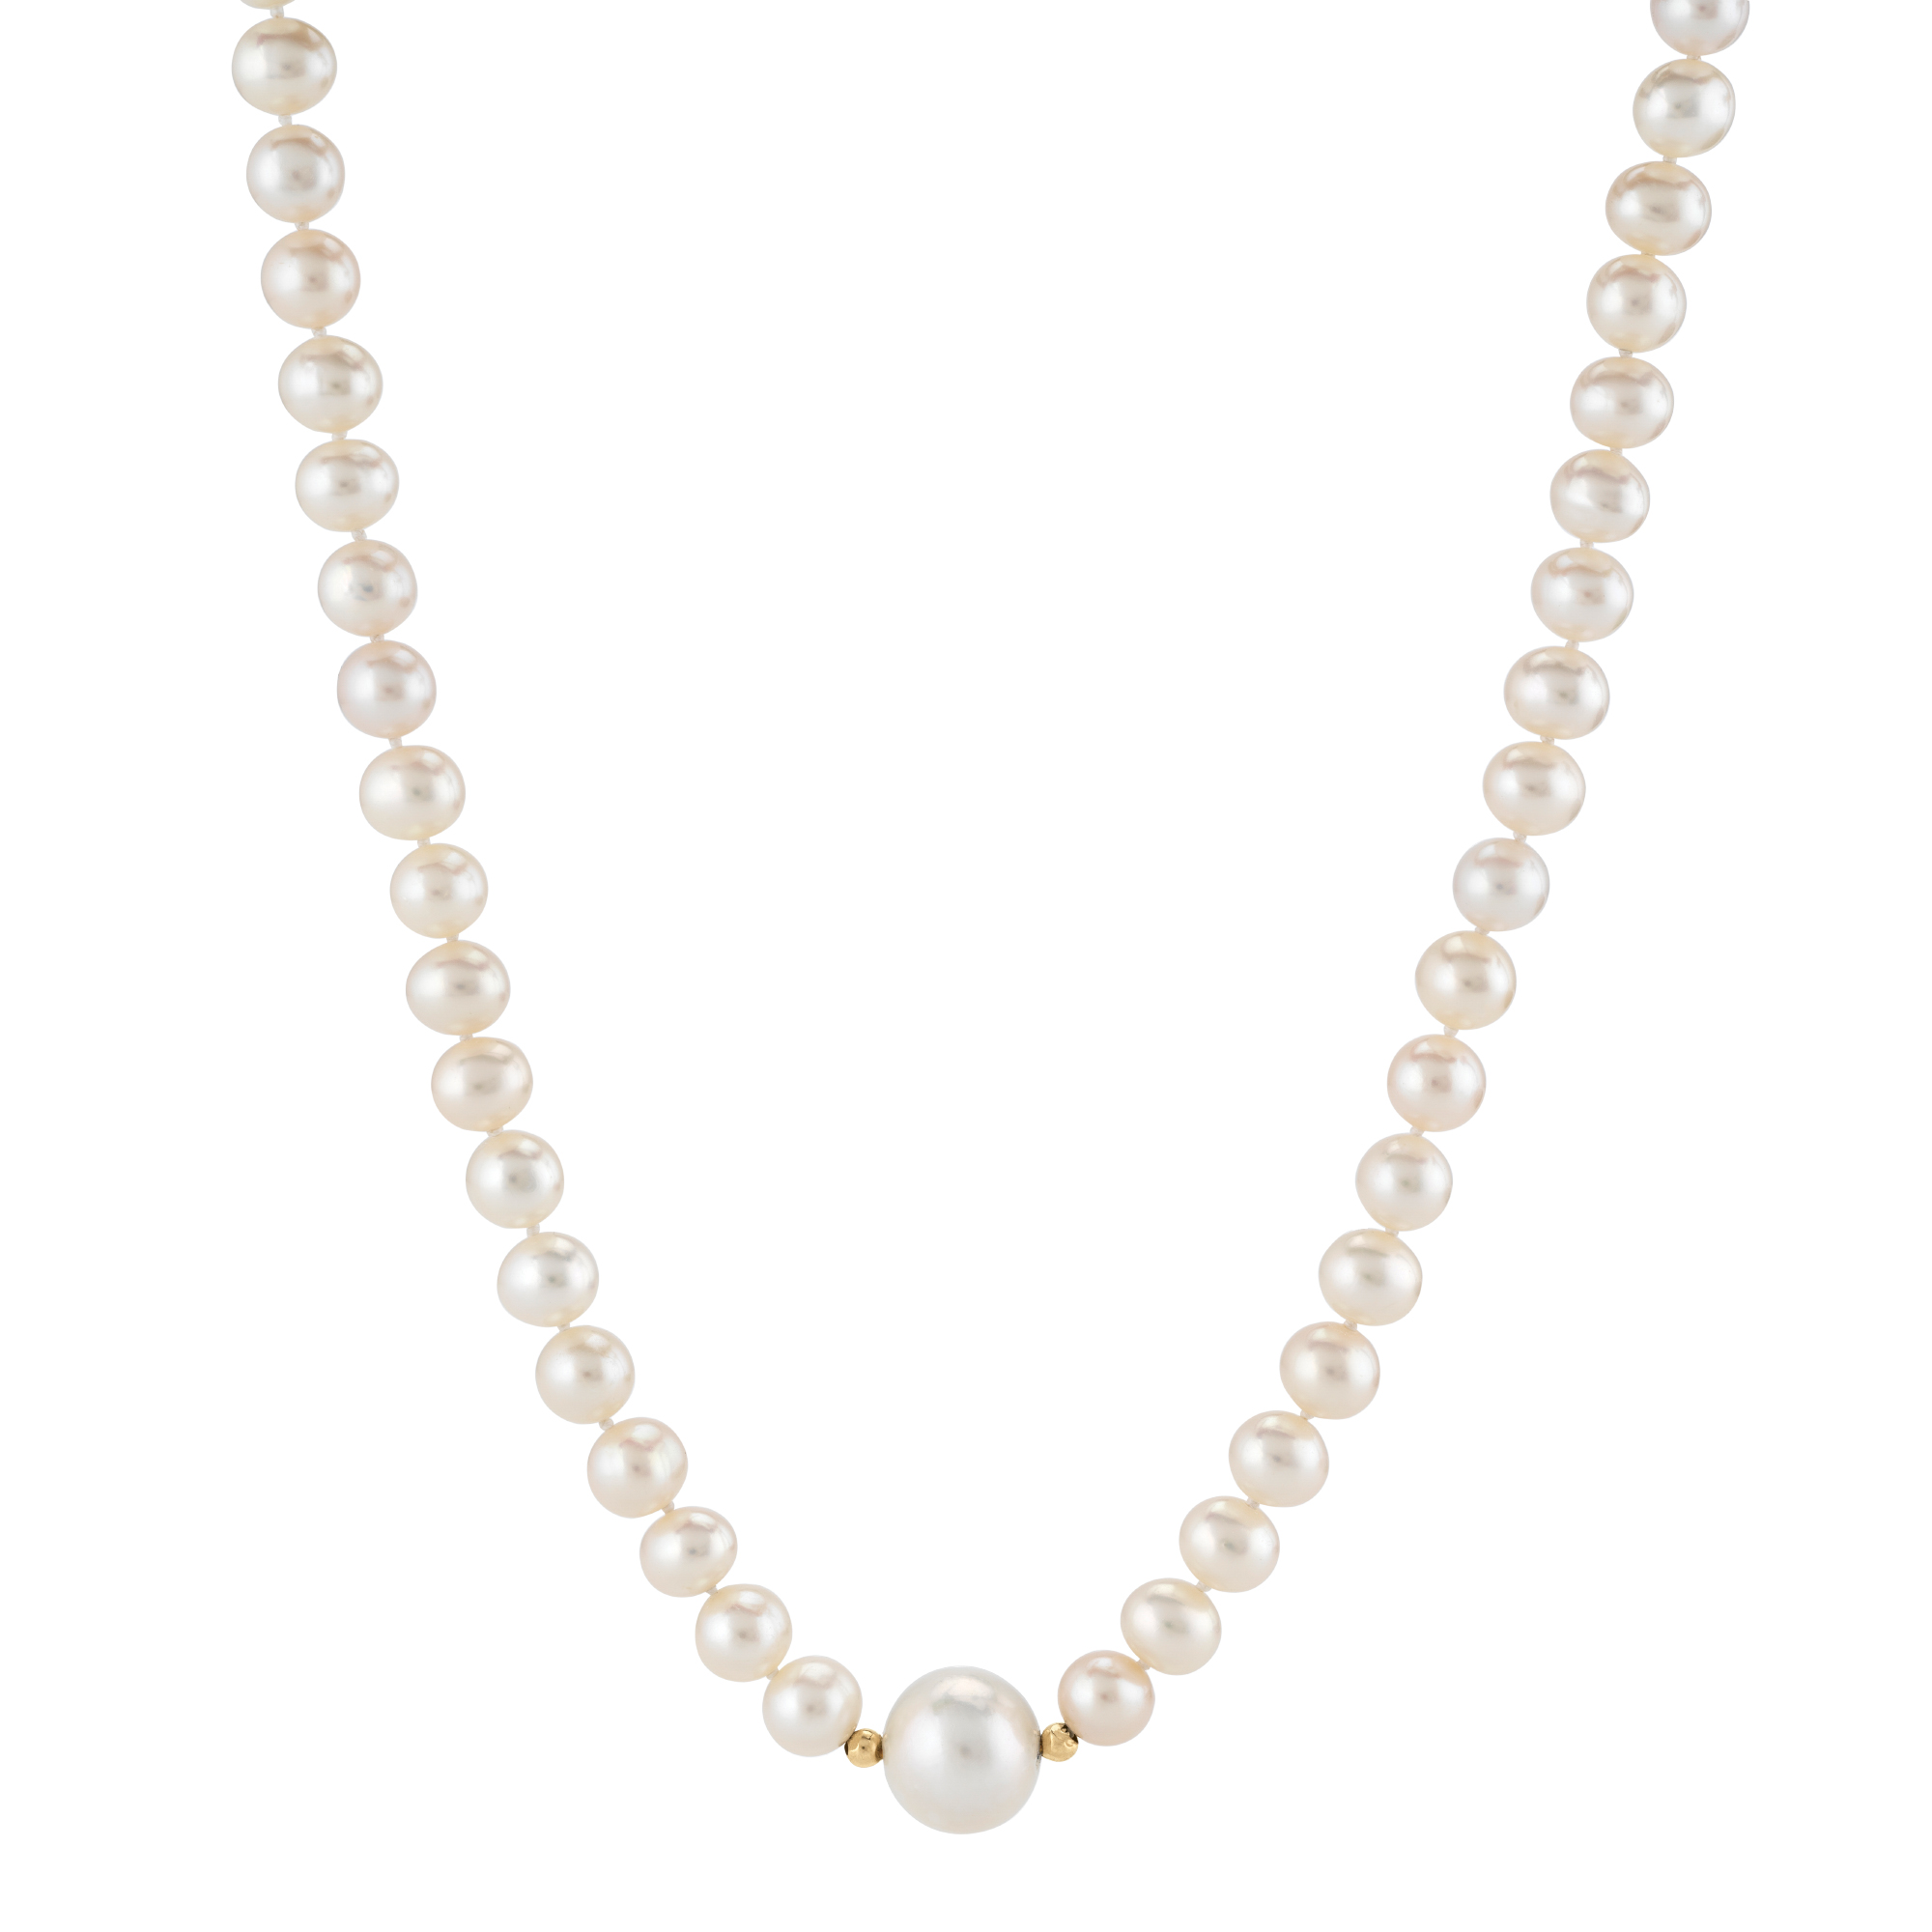 The Edison Pearl Necklace